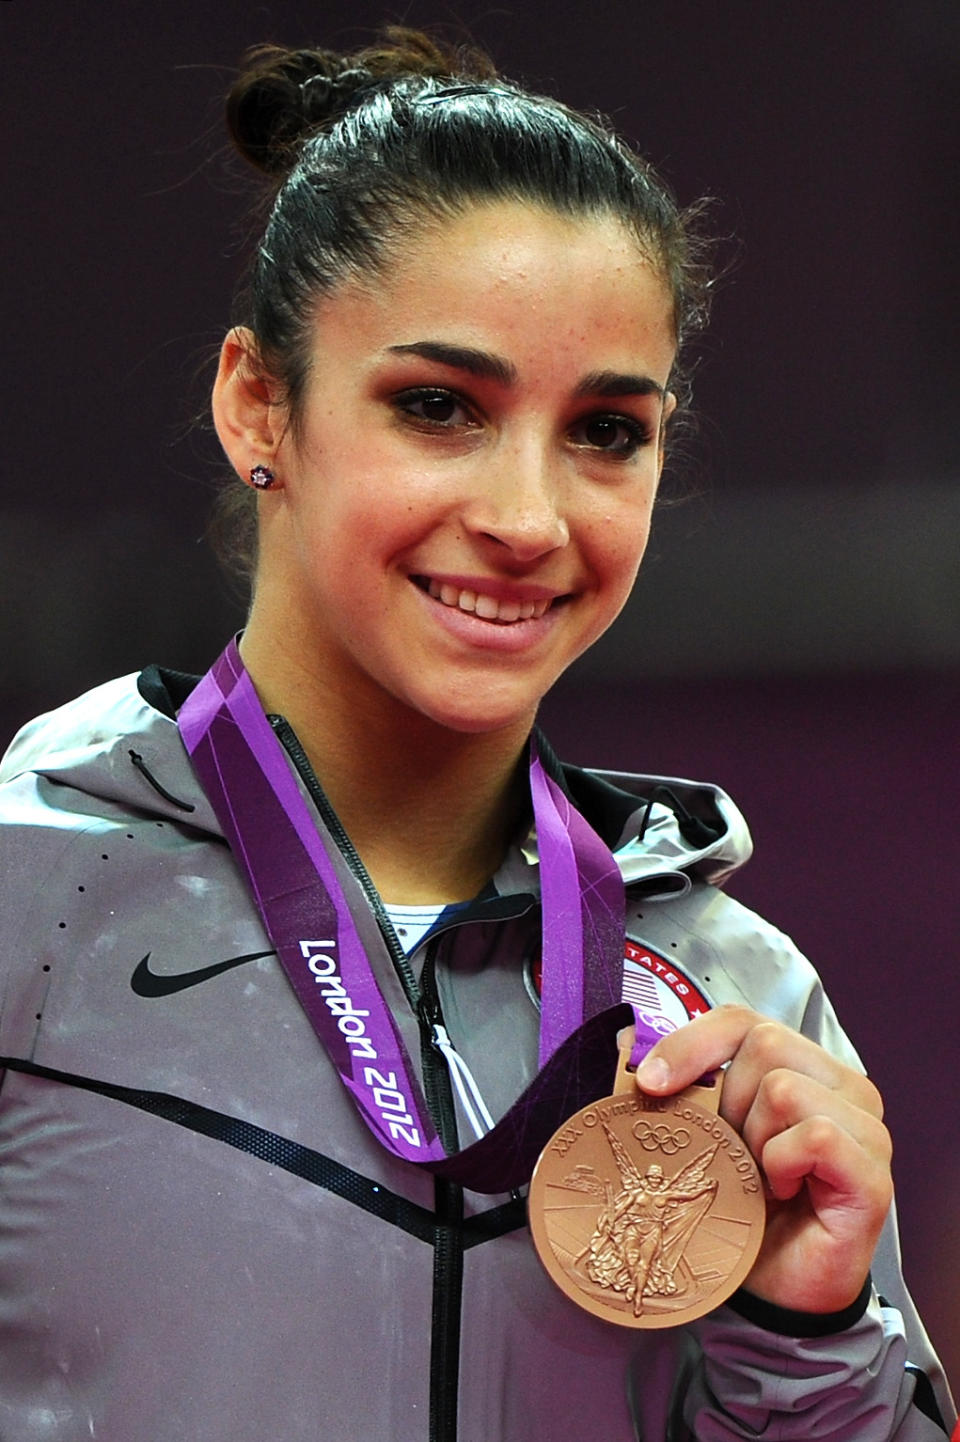 Bronze medalist <a href="http://sports.yahoo.com/olympics/gymnastics/alexandra-raisman-1134192/" data-ylk="slk:Alexandra Raisman" class="link ">Alexandra Raisman</a> of the United States poses on the podium during the medal ceremony for the on Day 11 of the London 2012 Olympic Games at North Greenwich Arena on August 7, 2012 in London, England. (Photo by Michael Regan/Getty Images)